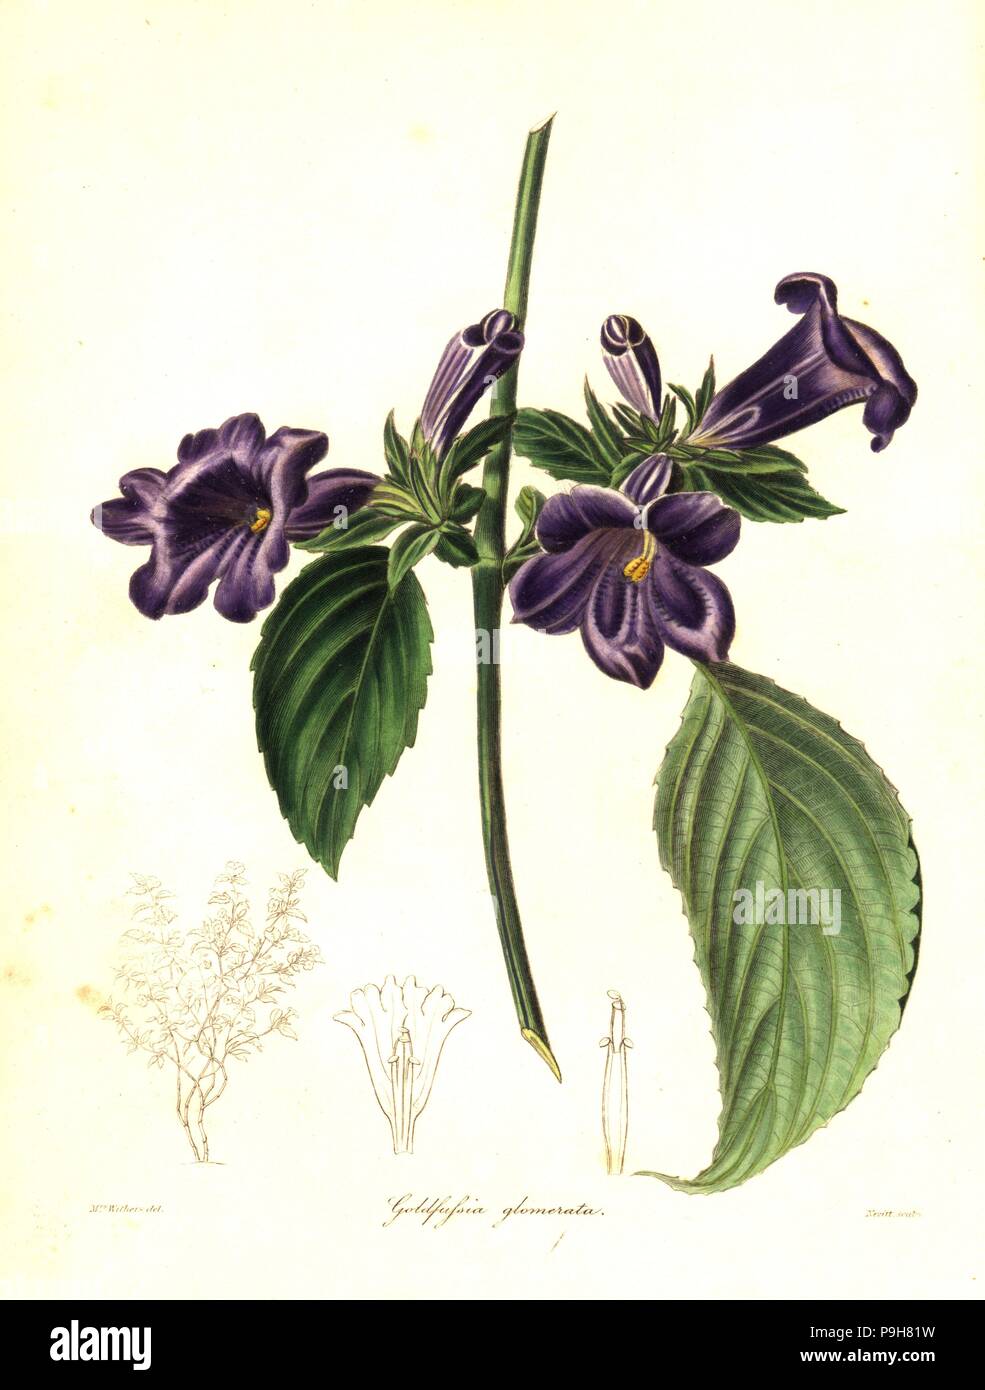 Strobilanthes glomerata (Clustered goldfussia, Goldfussia glomerata). Handcoloured copperplate engraving by S. Nevitt after a botanical illustration by Mrs Augusta Withers from Benjamin Maund and the Rev. John Stevens Henslow's The Botanist, London, 1836. Stock Photo